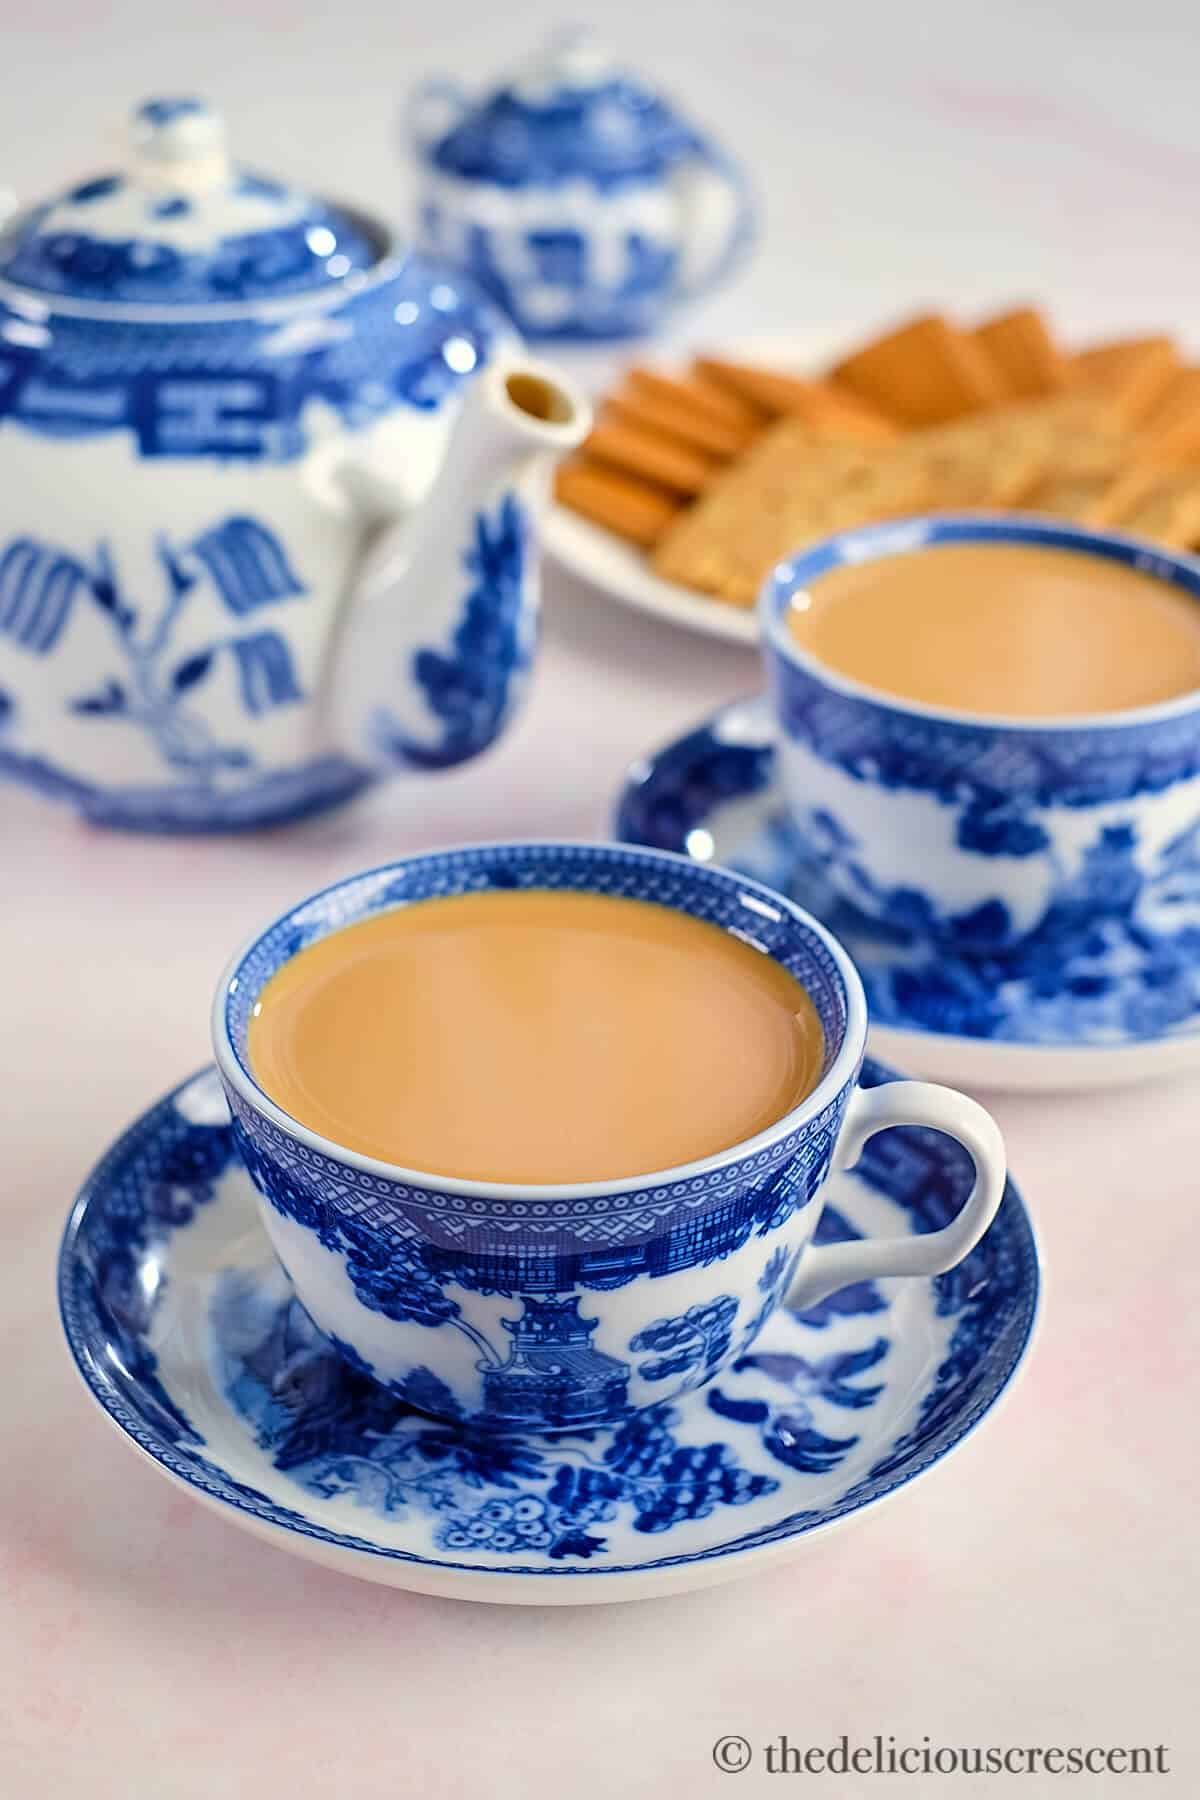 Spiced tea served in elegant blue and white cups.